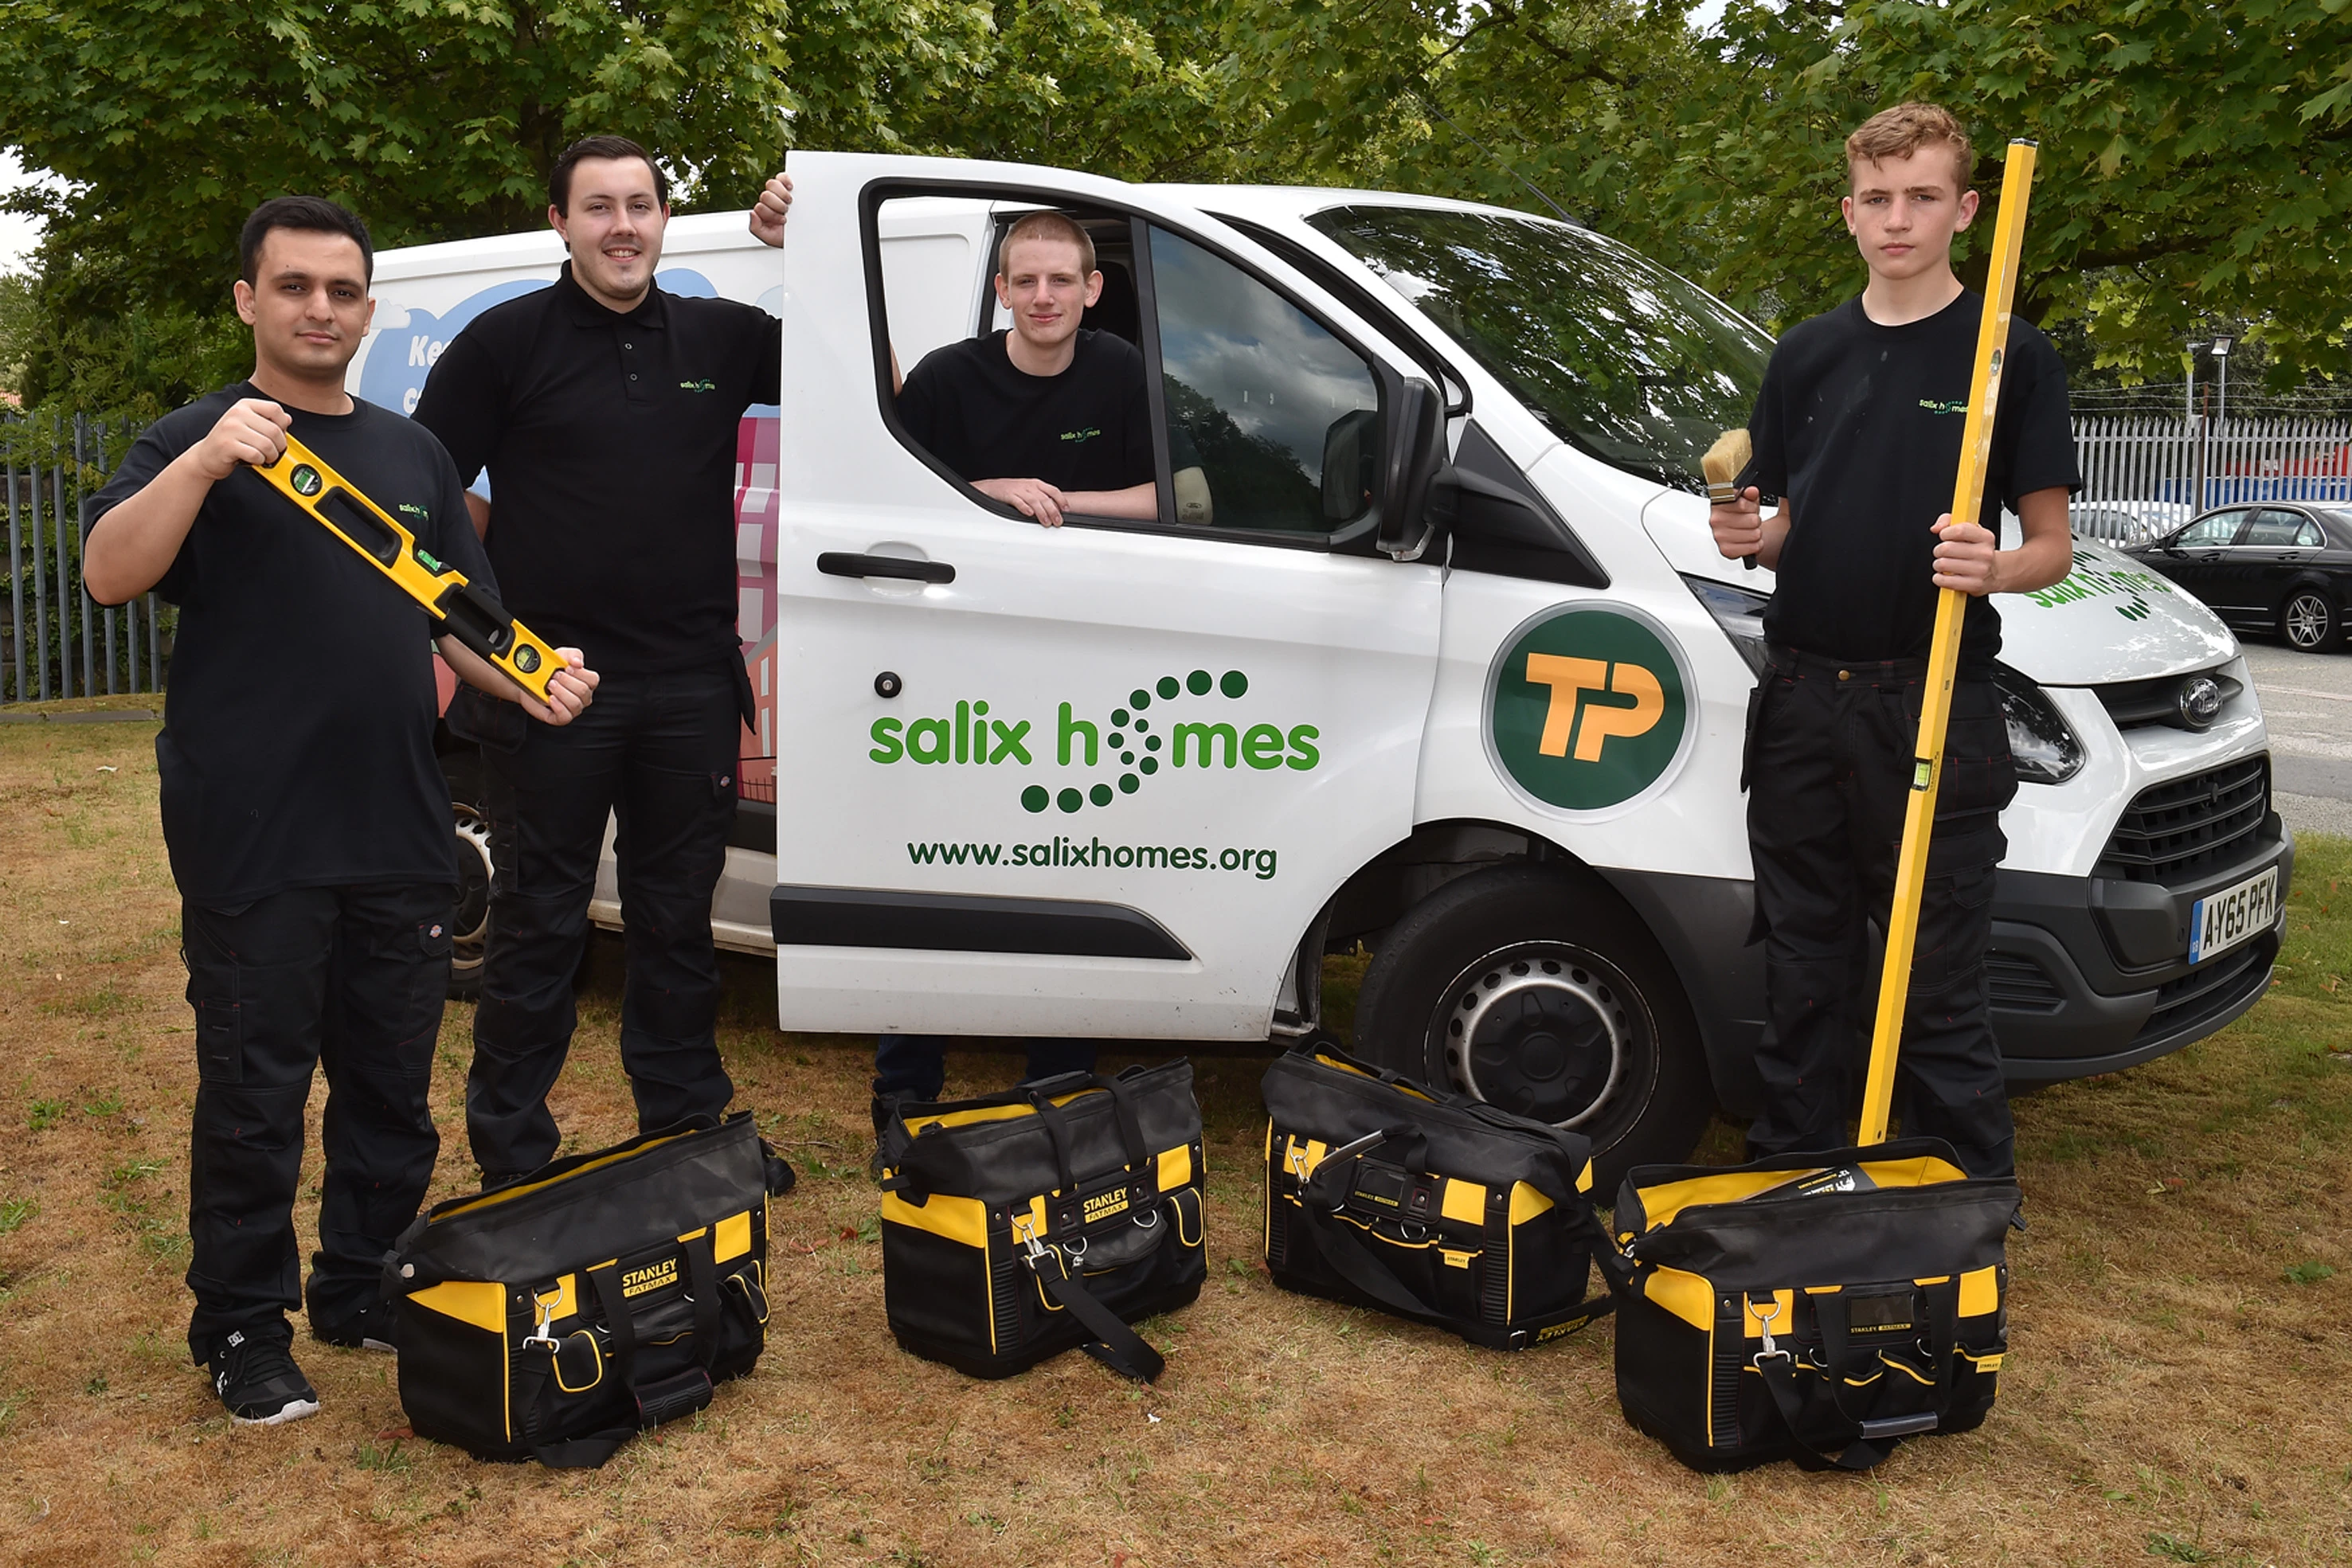 The new Salix Homes’ apprentices joining the housing association's in-house Repairs and Maintenance Team. From left: Ali Nikbakht, Mason Gill, Connor Boyle and Kade Heath.